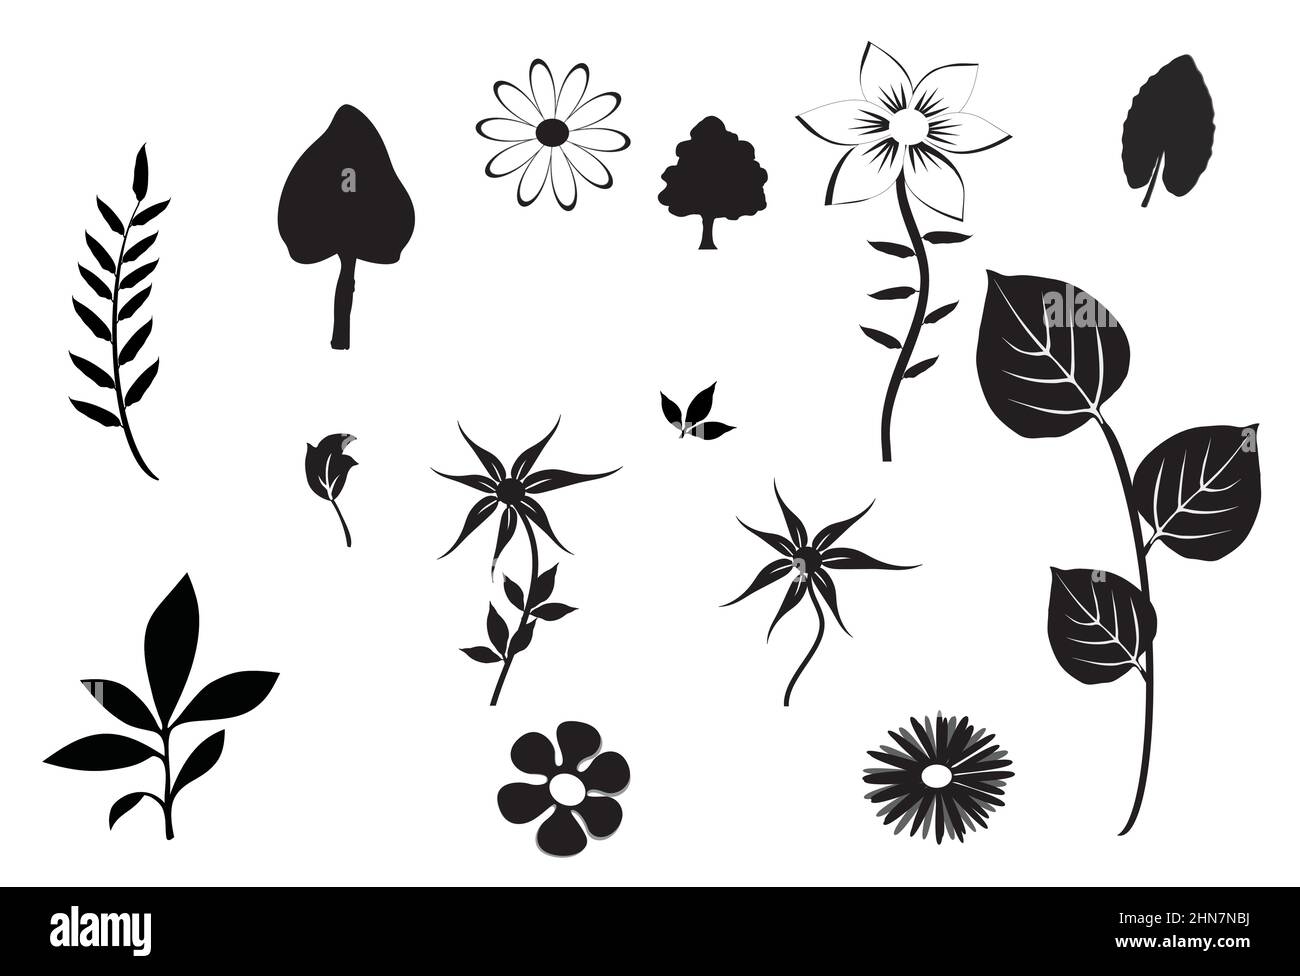 silhouette of leaves of different shapes and seizes Stock Vector